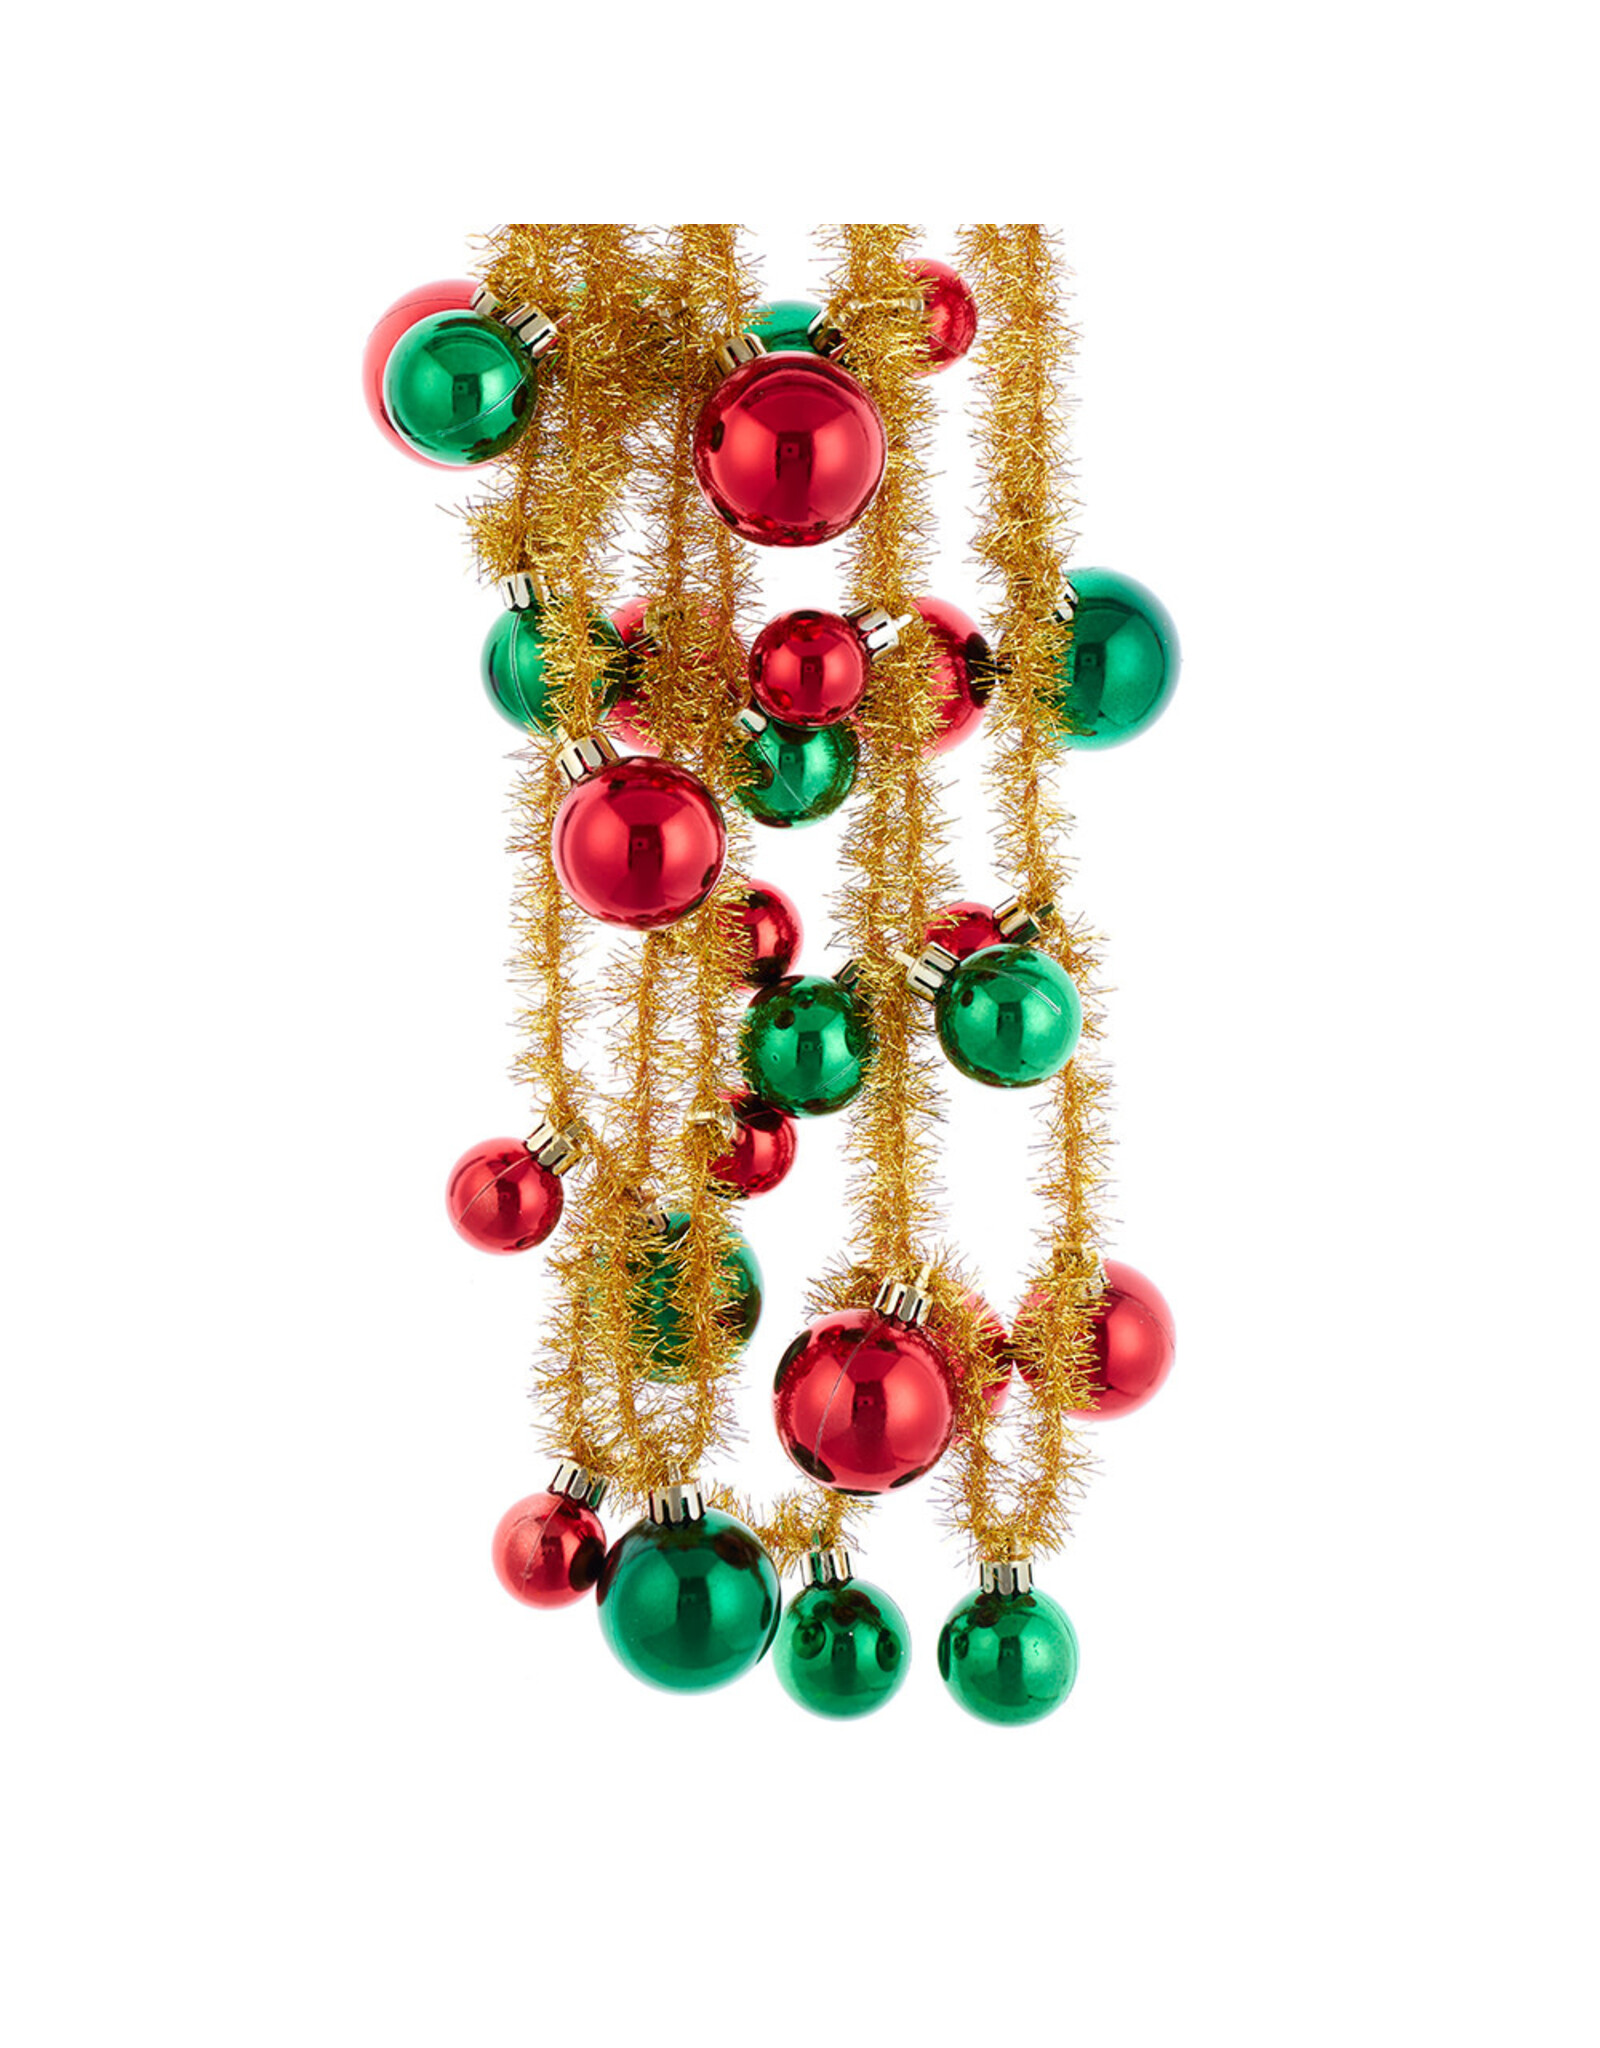 Kurt Adler Gold Tinsel With Red And Green Ball Ornament Garland 6FT